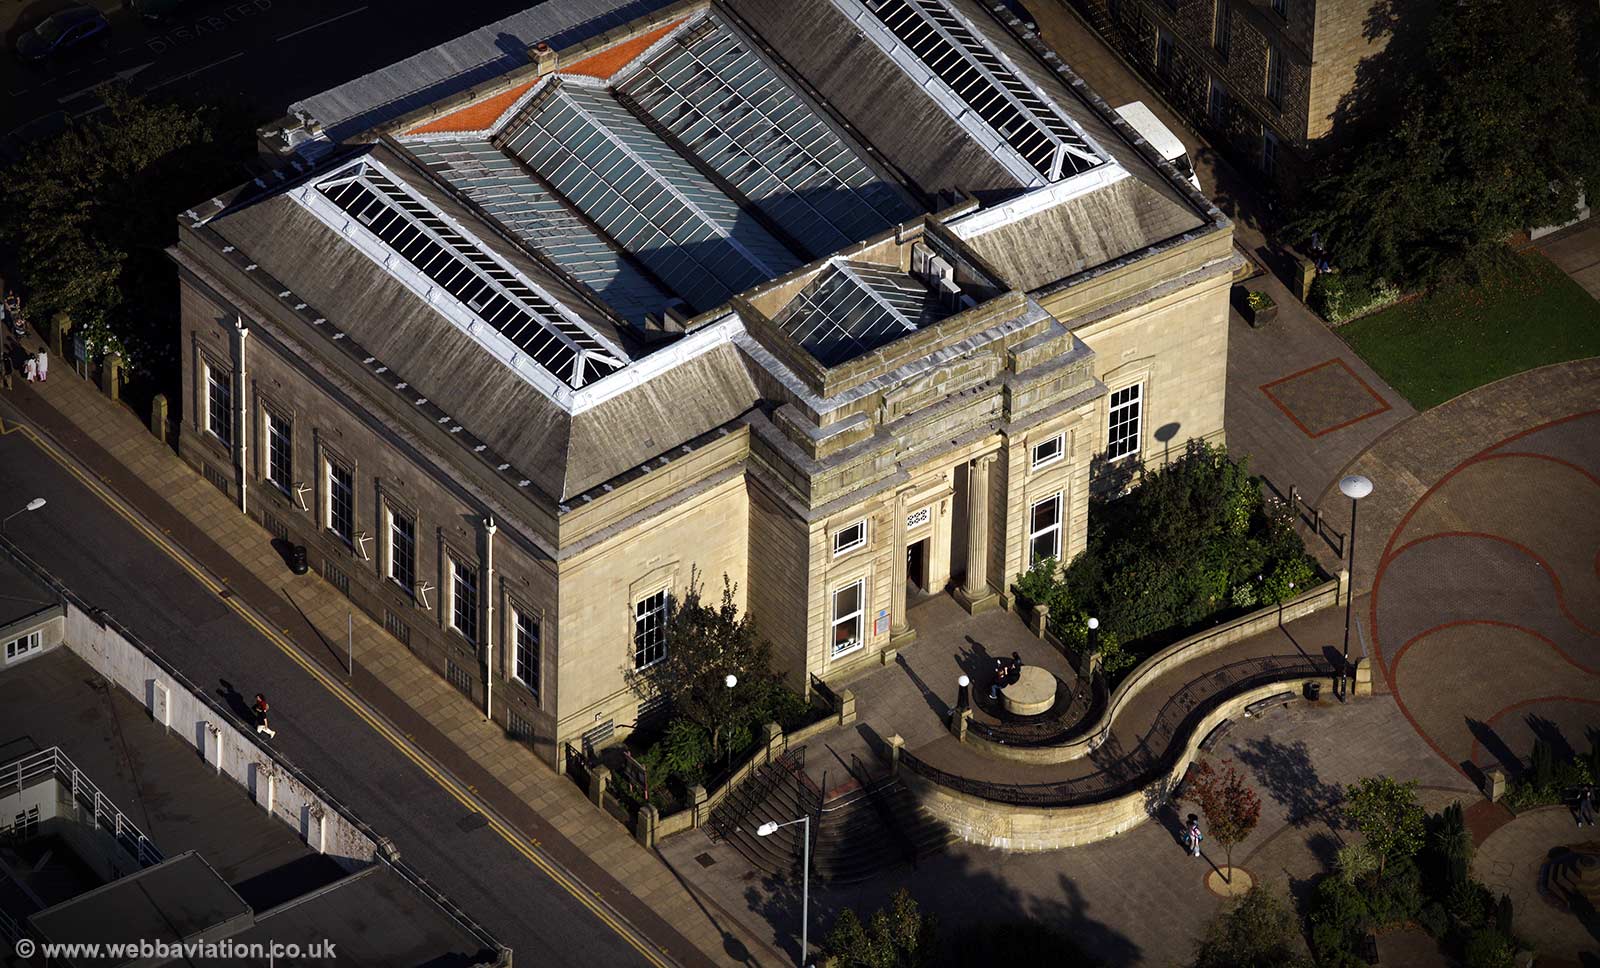 Burnley Central Library aerial photograph